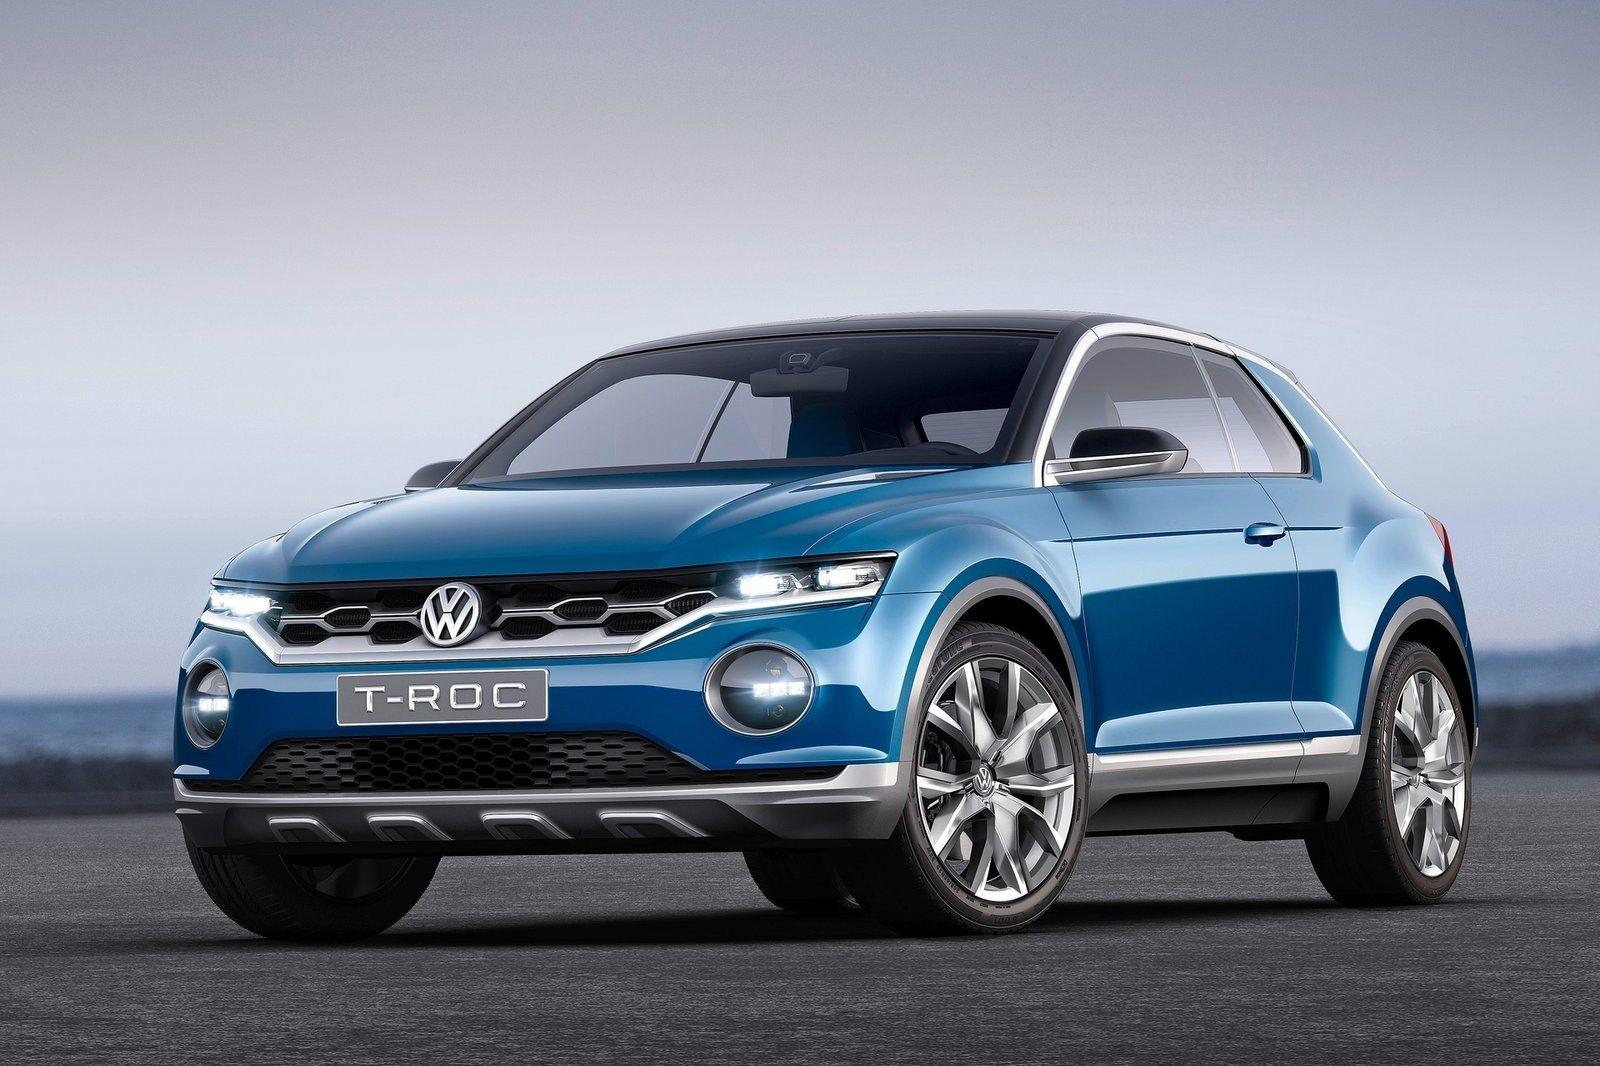 Volkswagen T Roc Concept Is An SUV Convertible Done Right